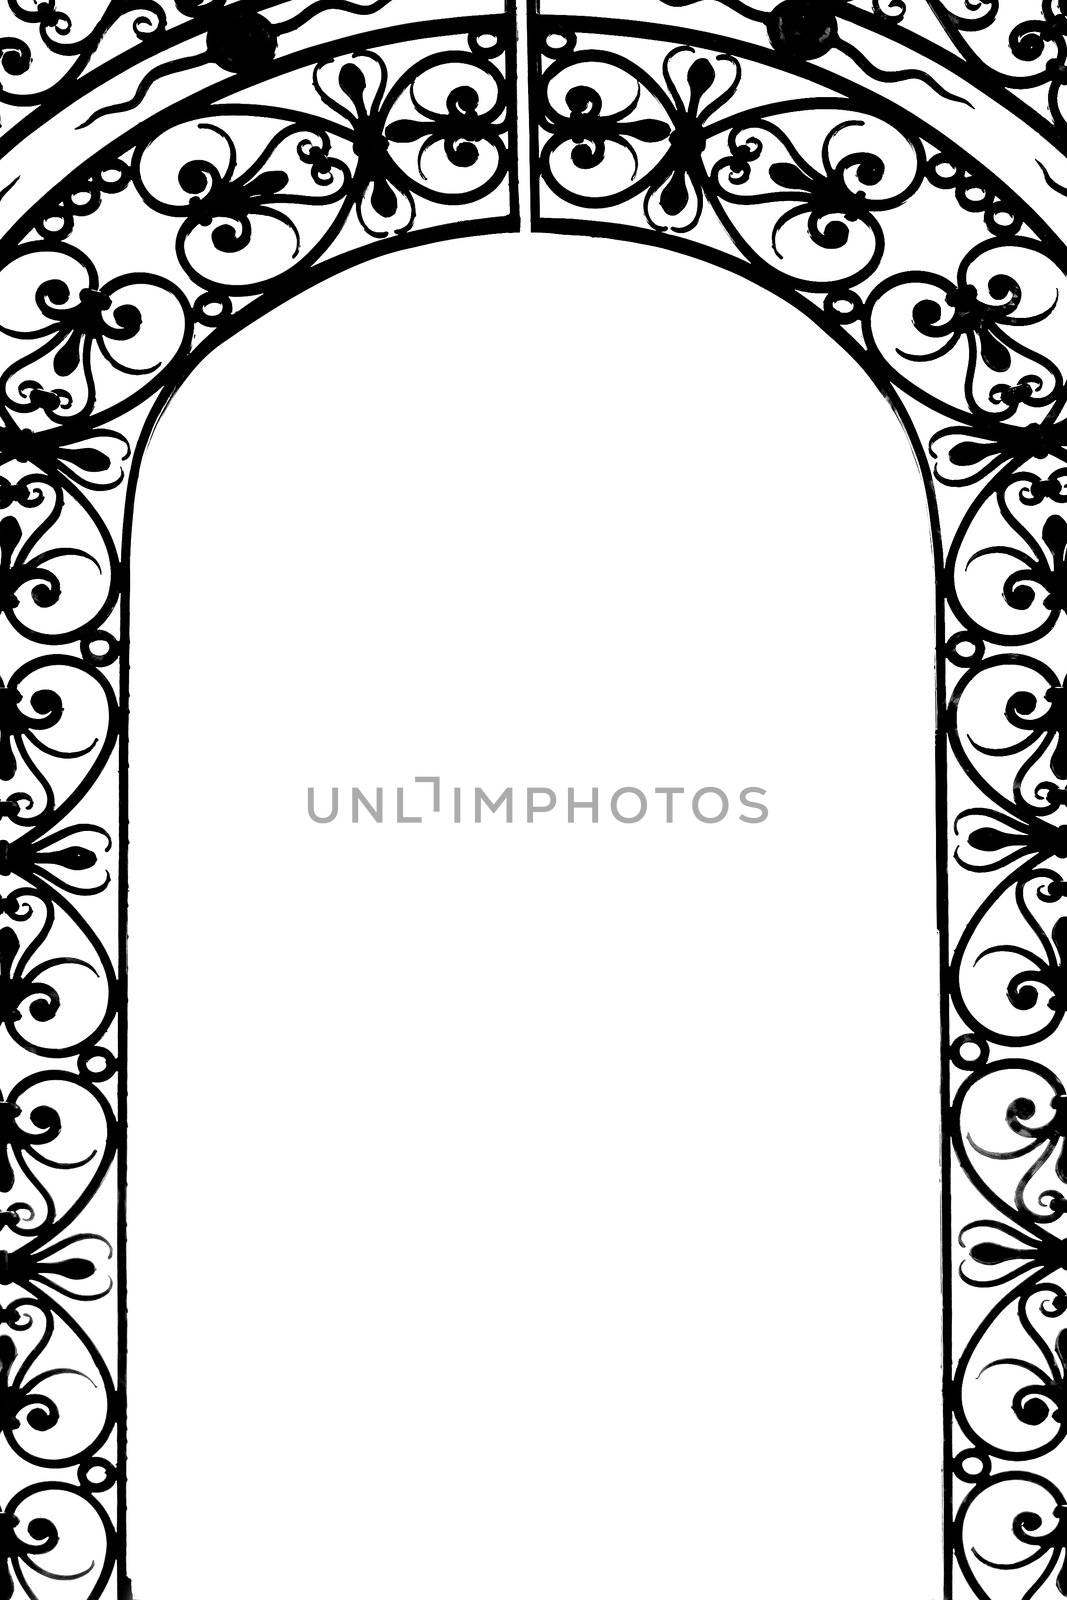 Fanciful pattern of gates. Isolated on white